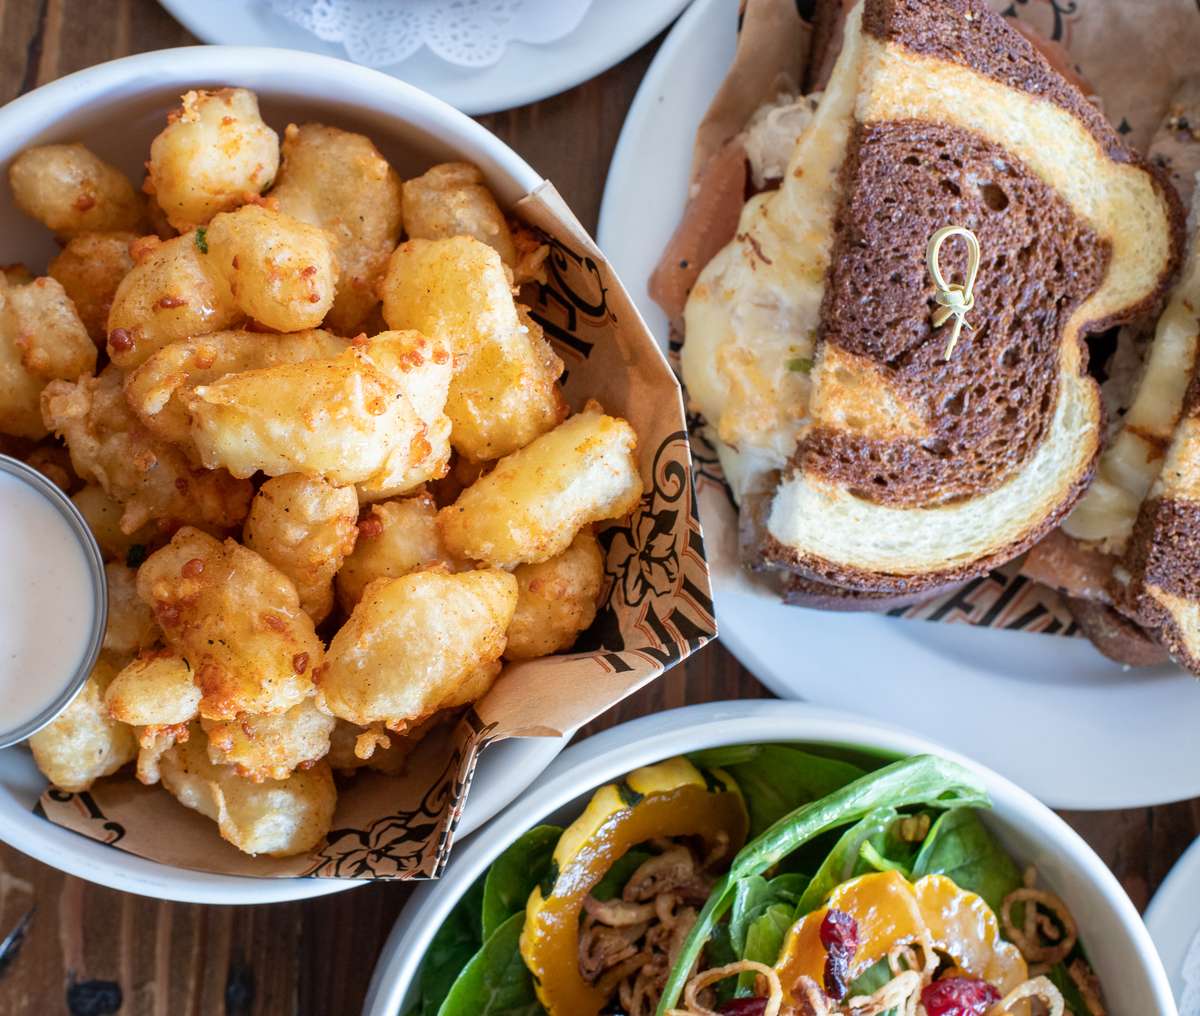 cheese curds, salad and sandwich